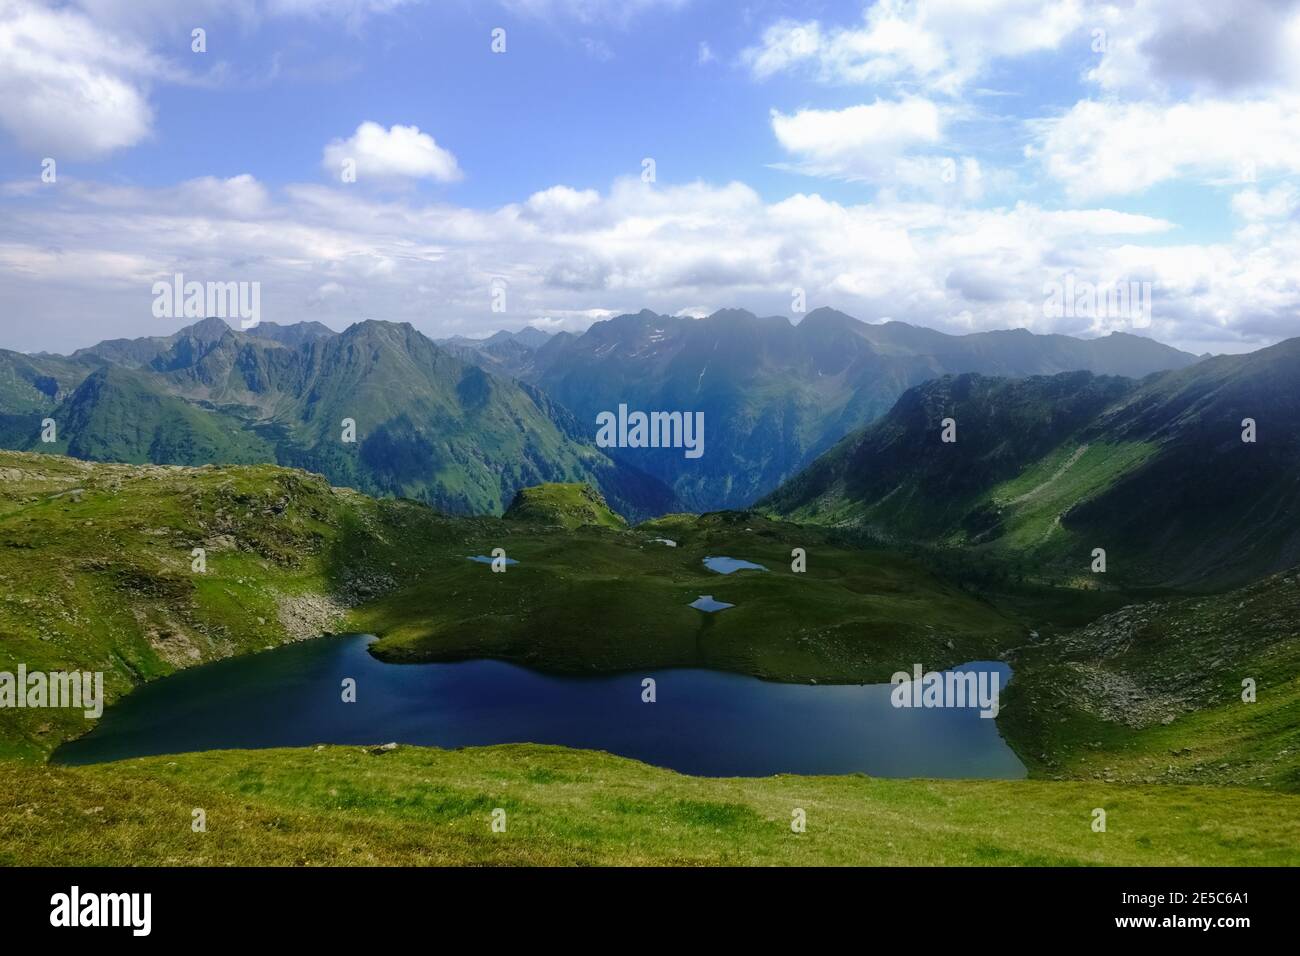 marvelous landscape with lot of mountain lakes and mountains on vacation Stock Photo